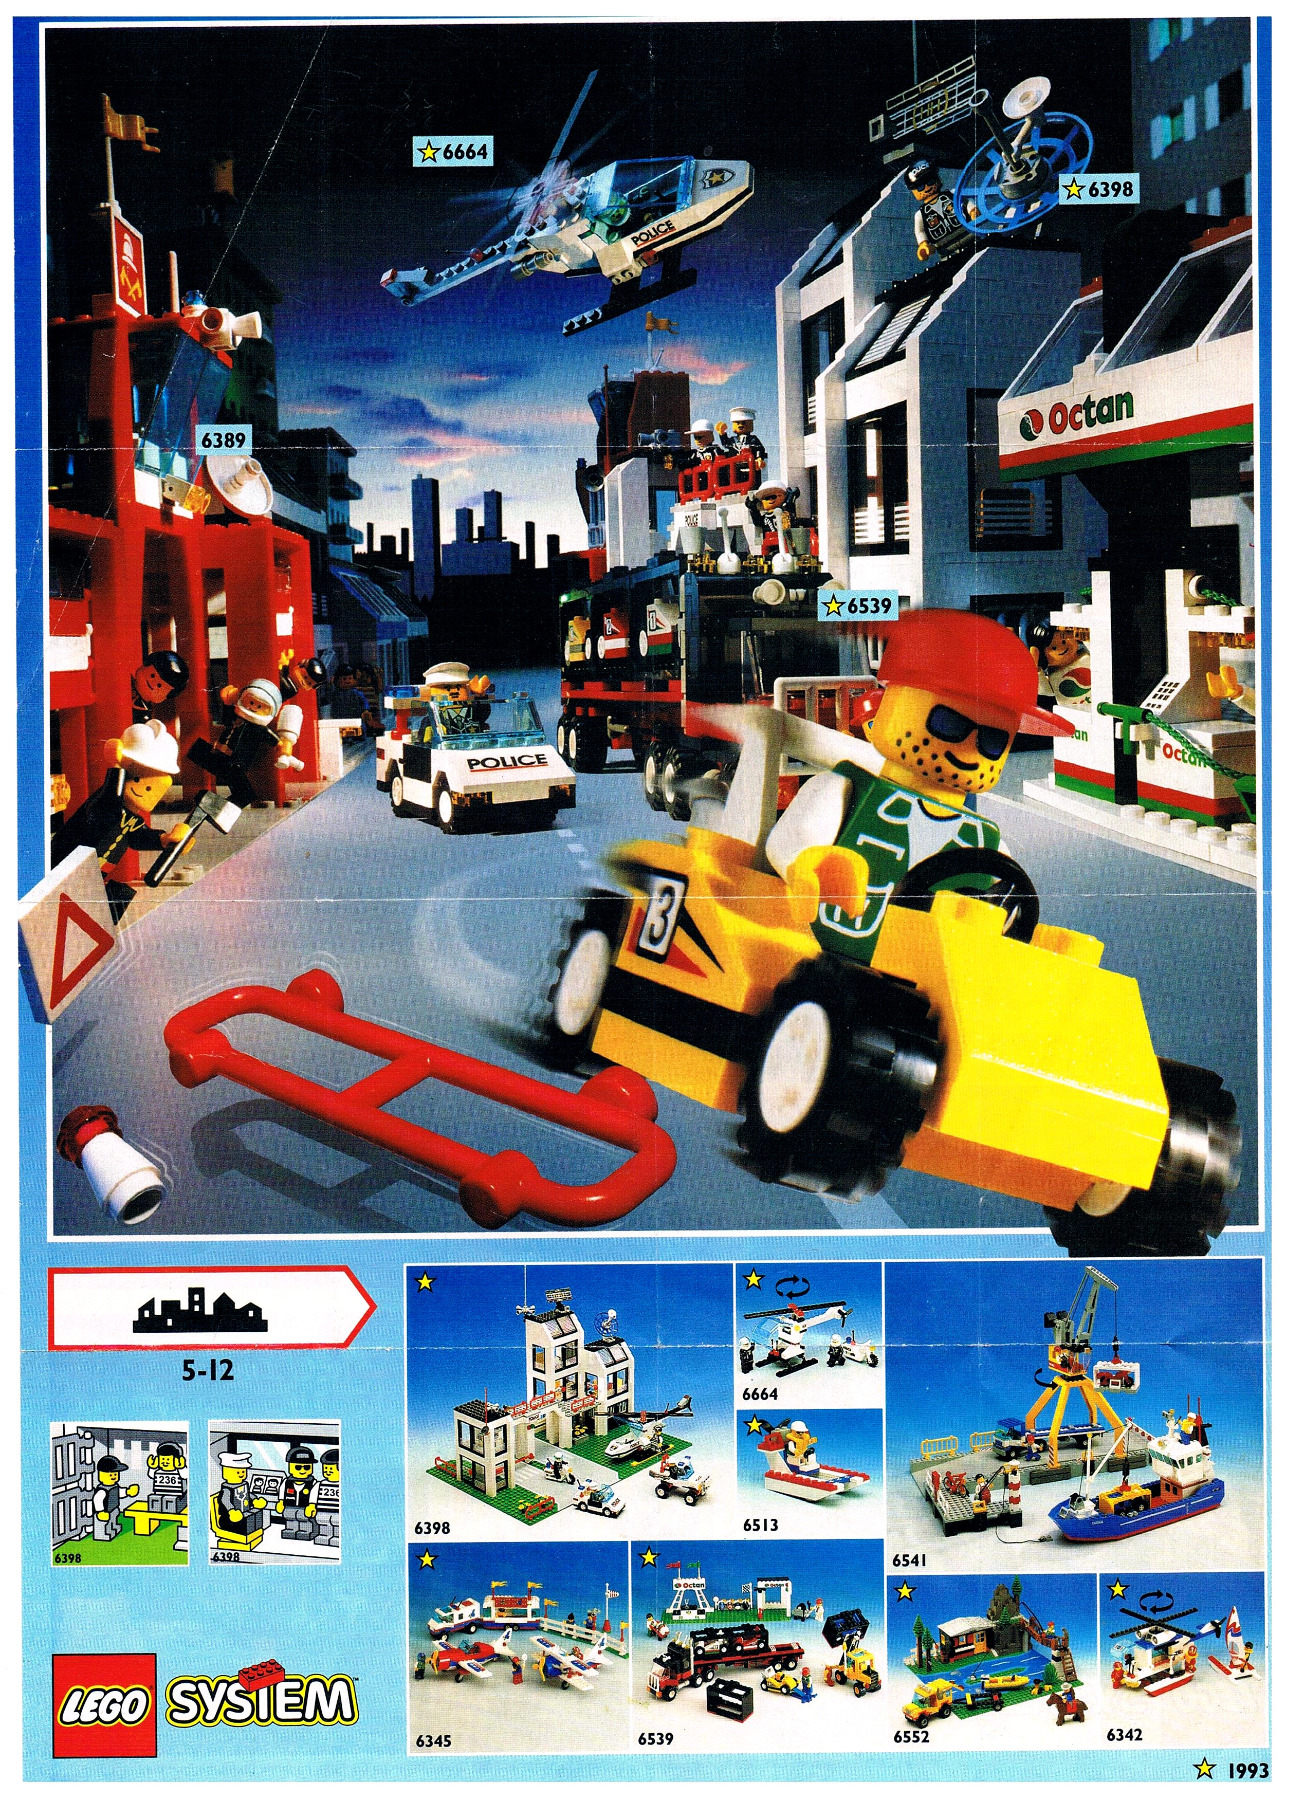 Lego advertising flyer from 1993